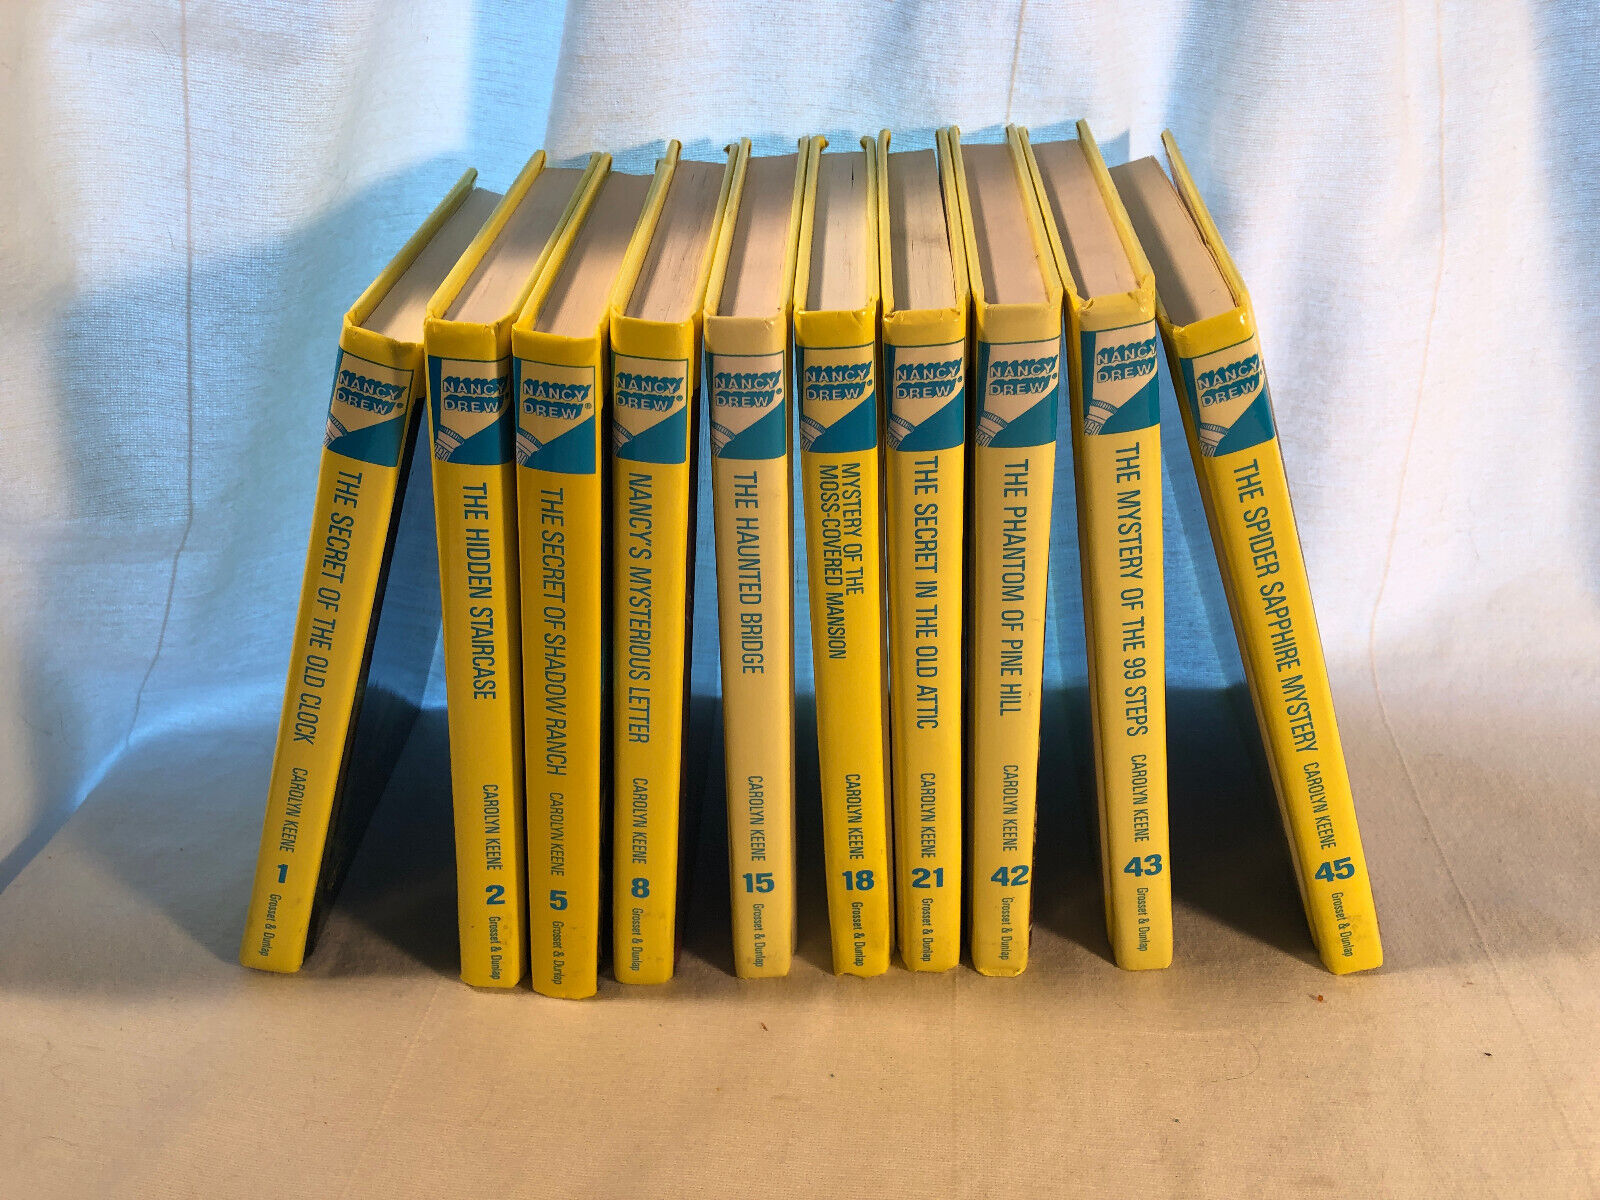 Primary image for 10 Nancy Drew Picture Cover Novels 1  2  5  8  15  18  21  42  43  45